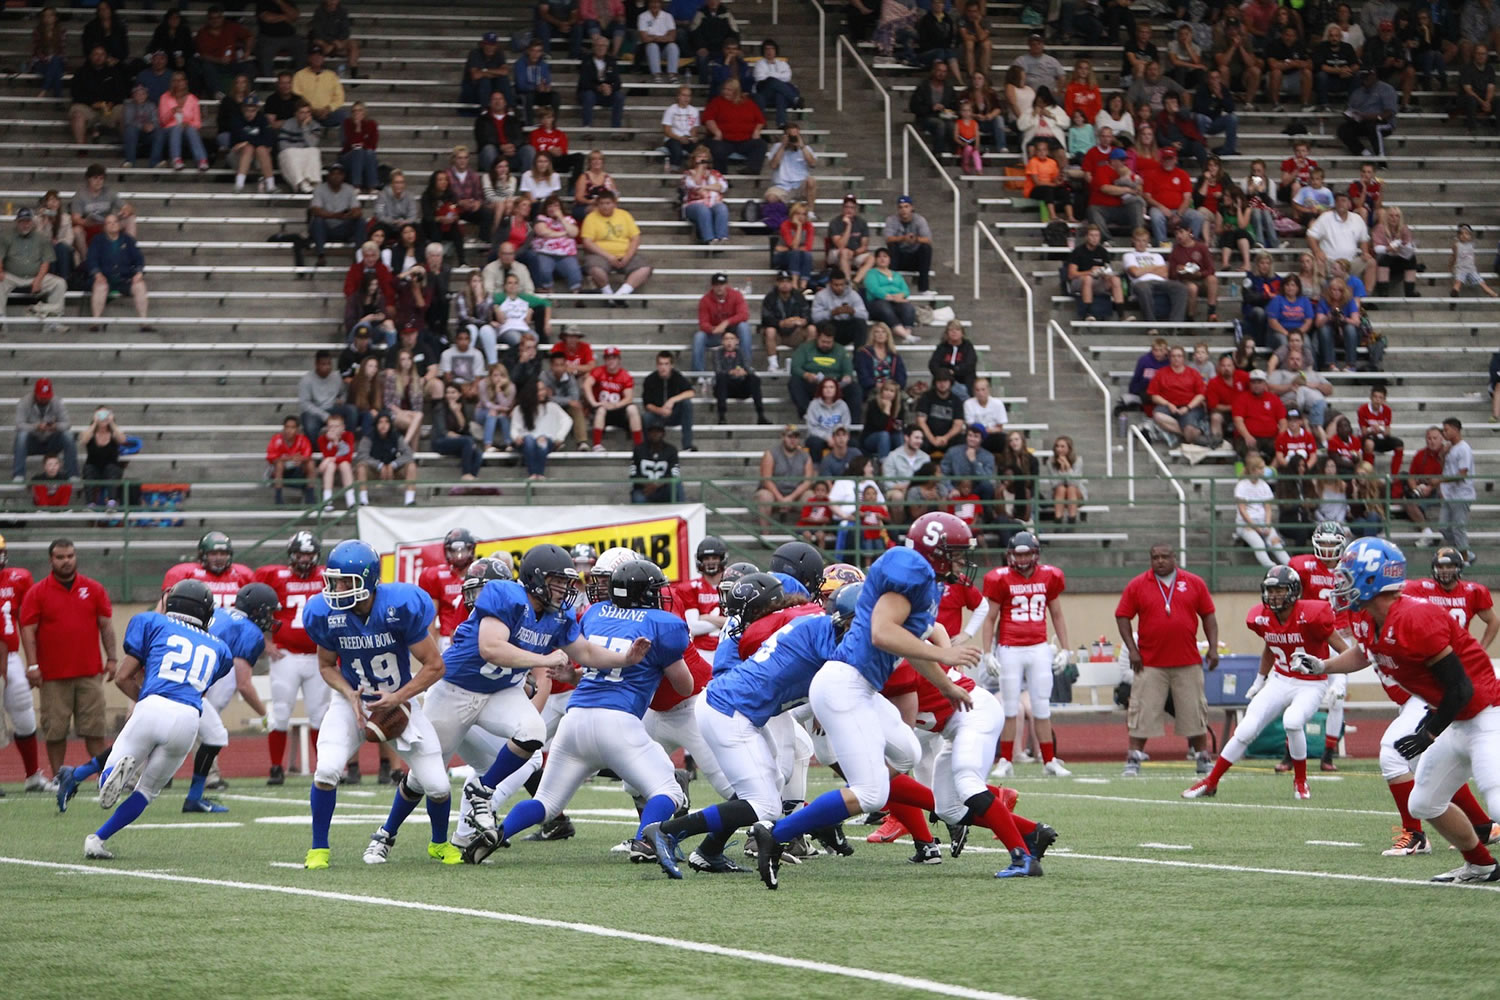 The 2015 Freedom Bowl Classic played at McKenzie Stadium featured just 49 players.